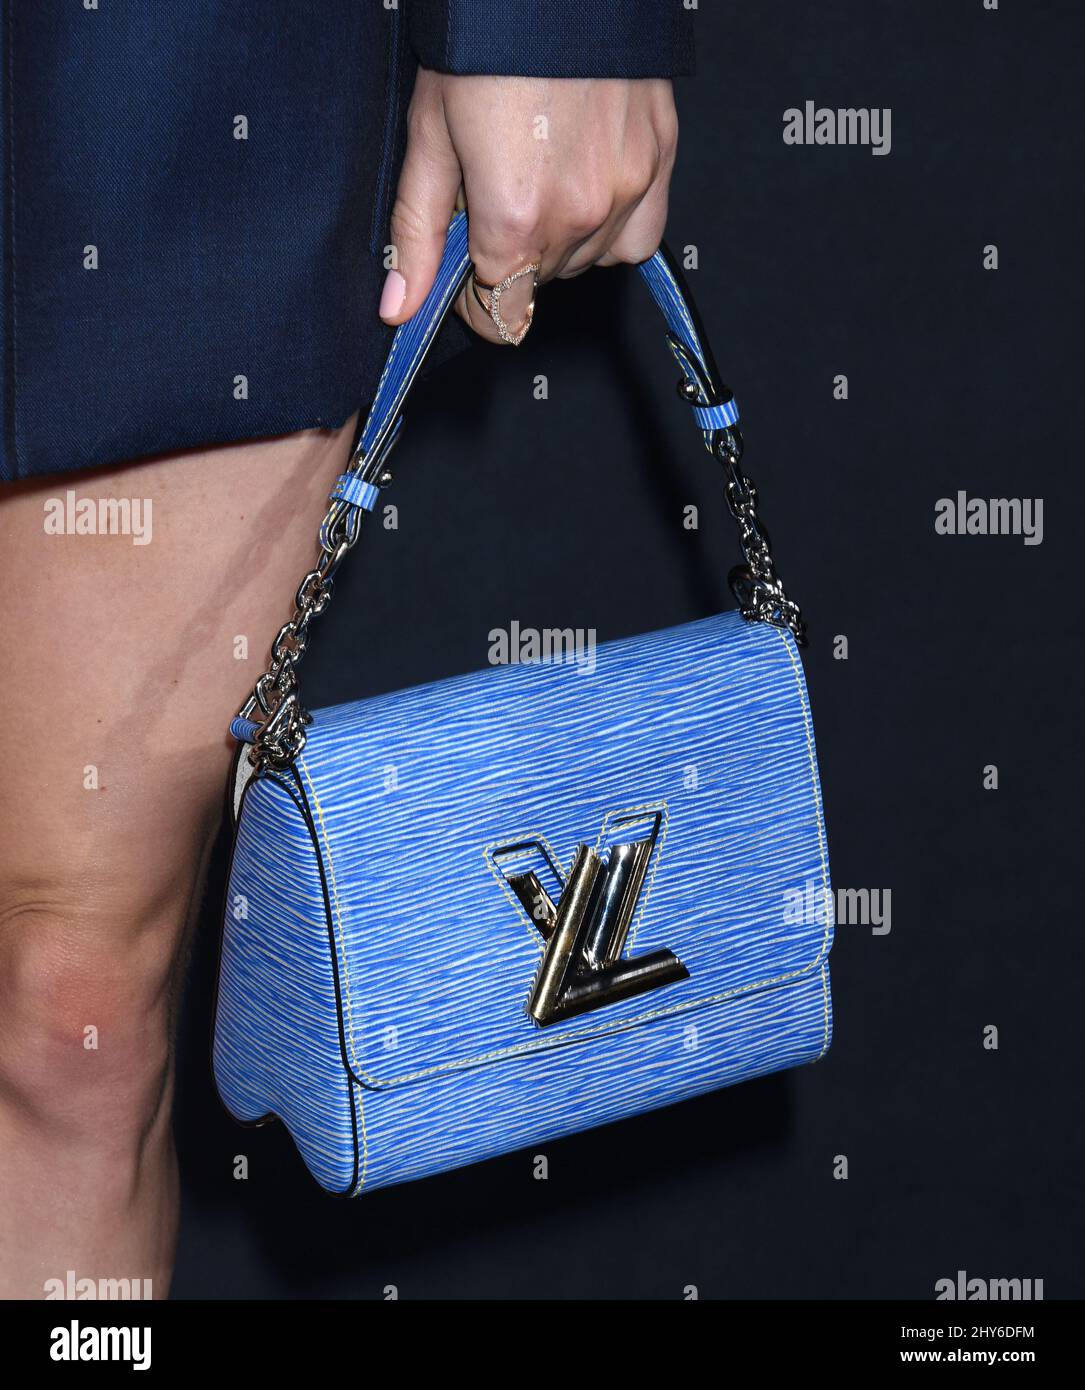 Find Louis Vuitton's limited-edition Byron Bay handbag at its